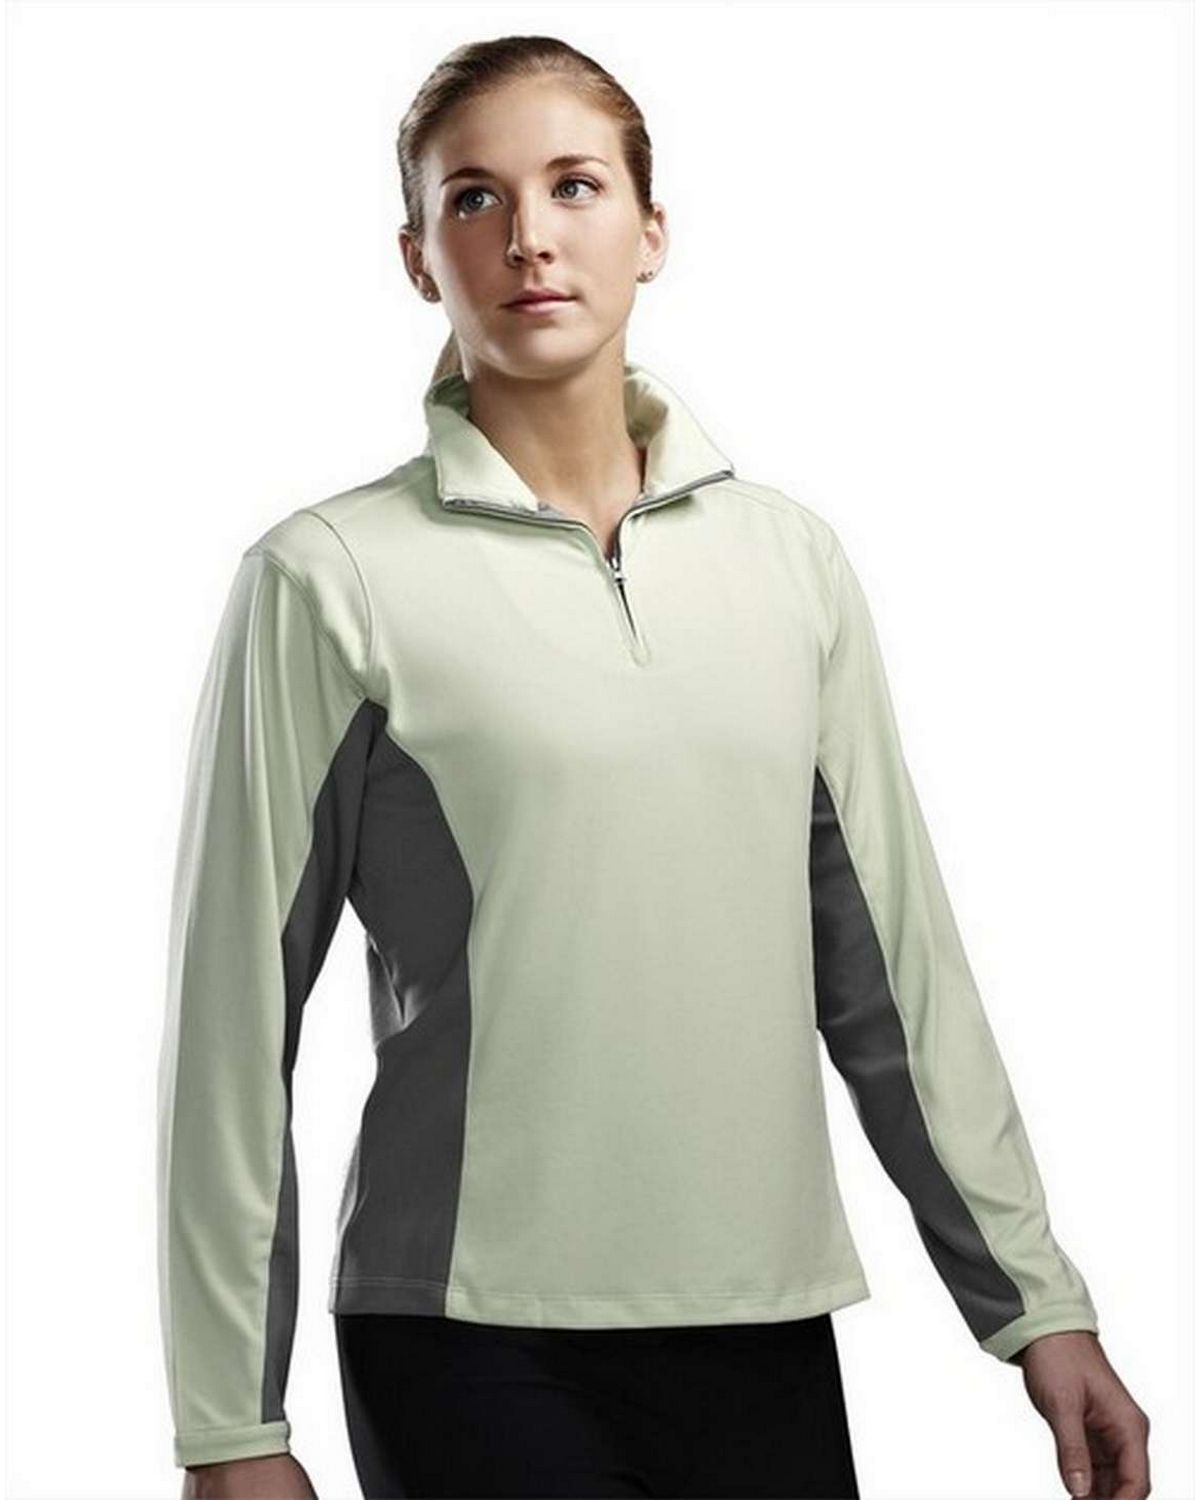 Tri-Mountain Performance 621 Women's Poly UltraCool 1/4 zip pullover shirt